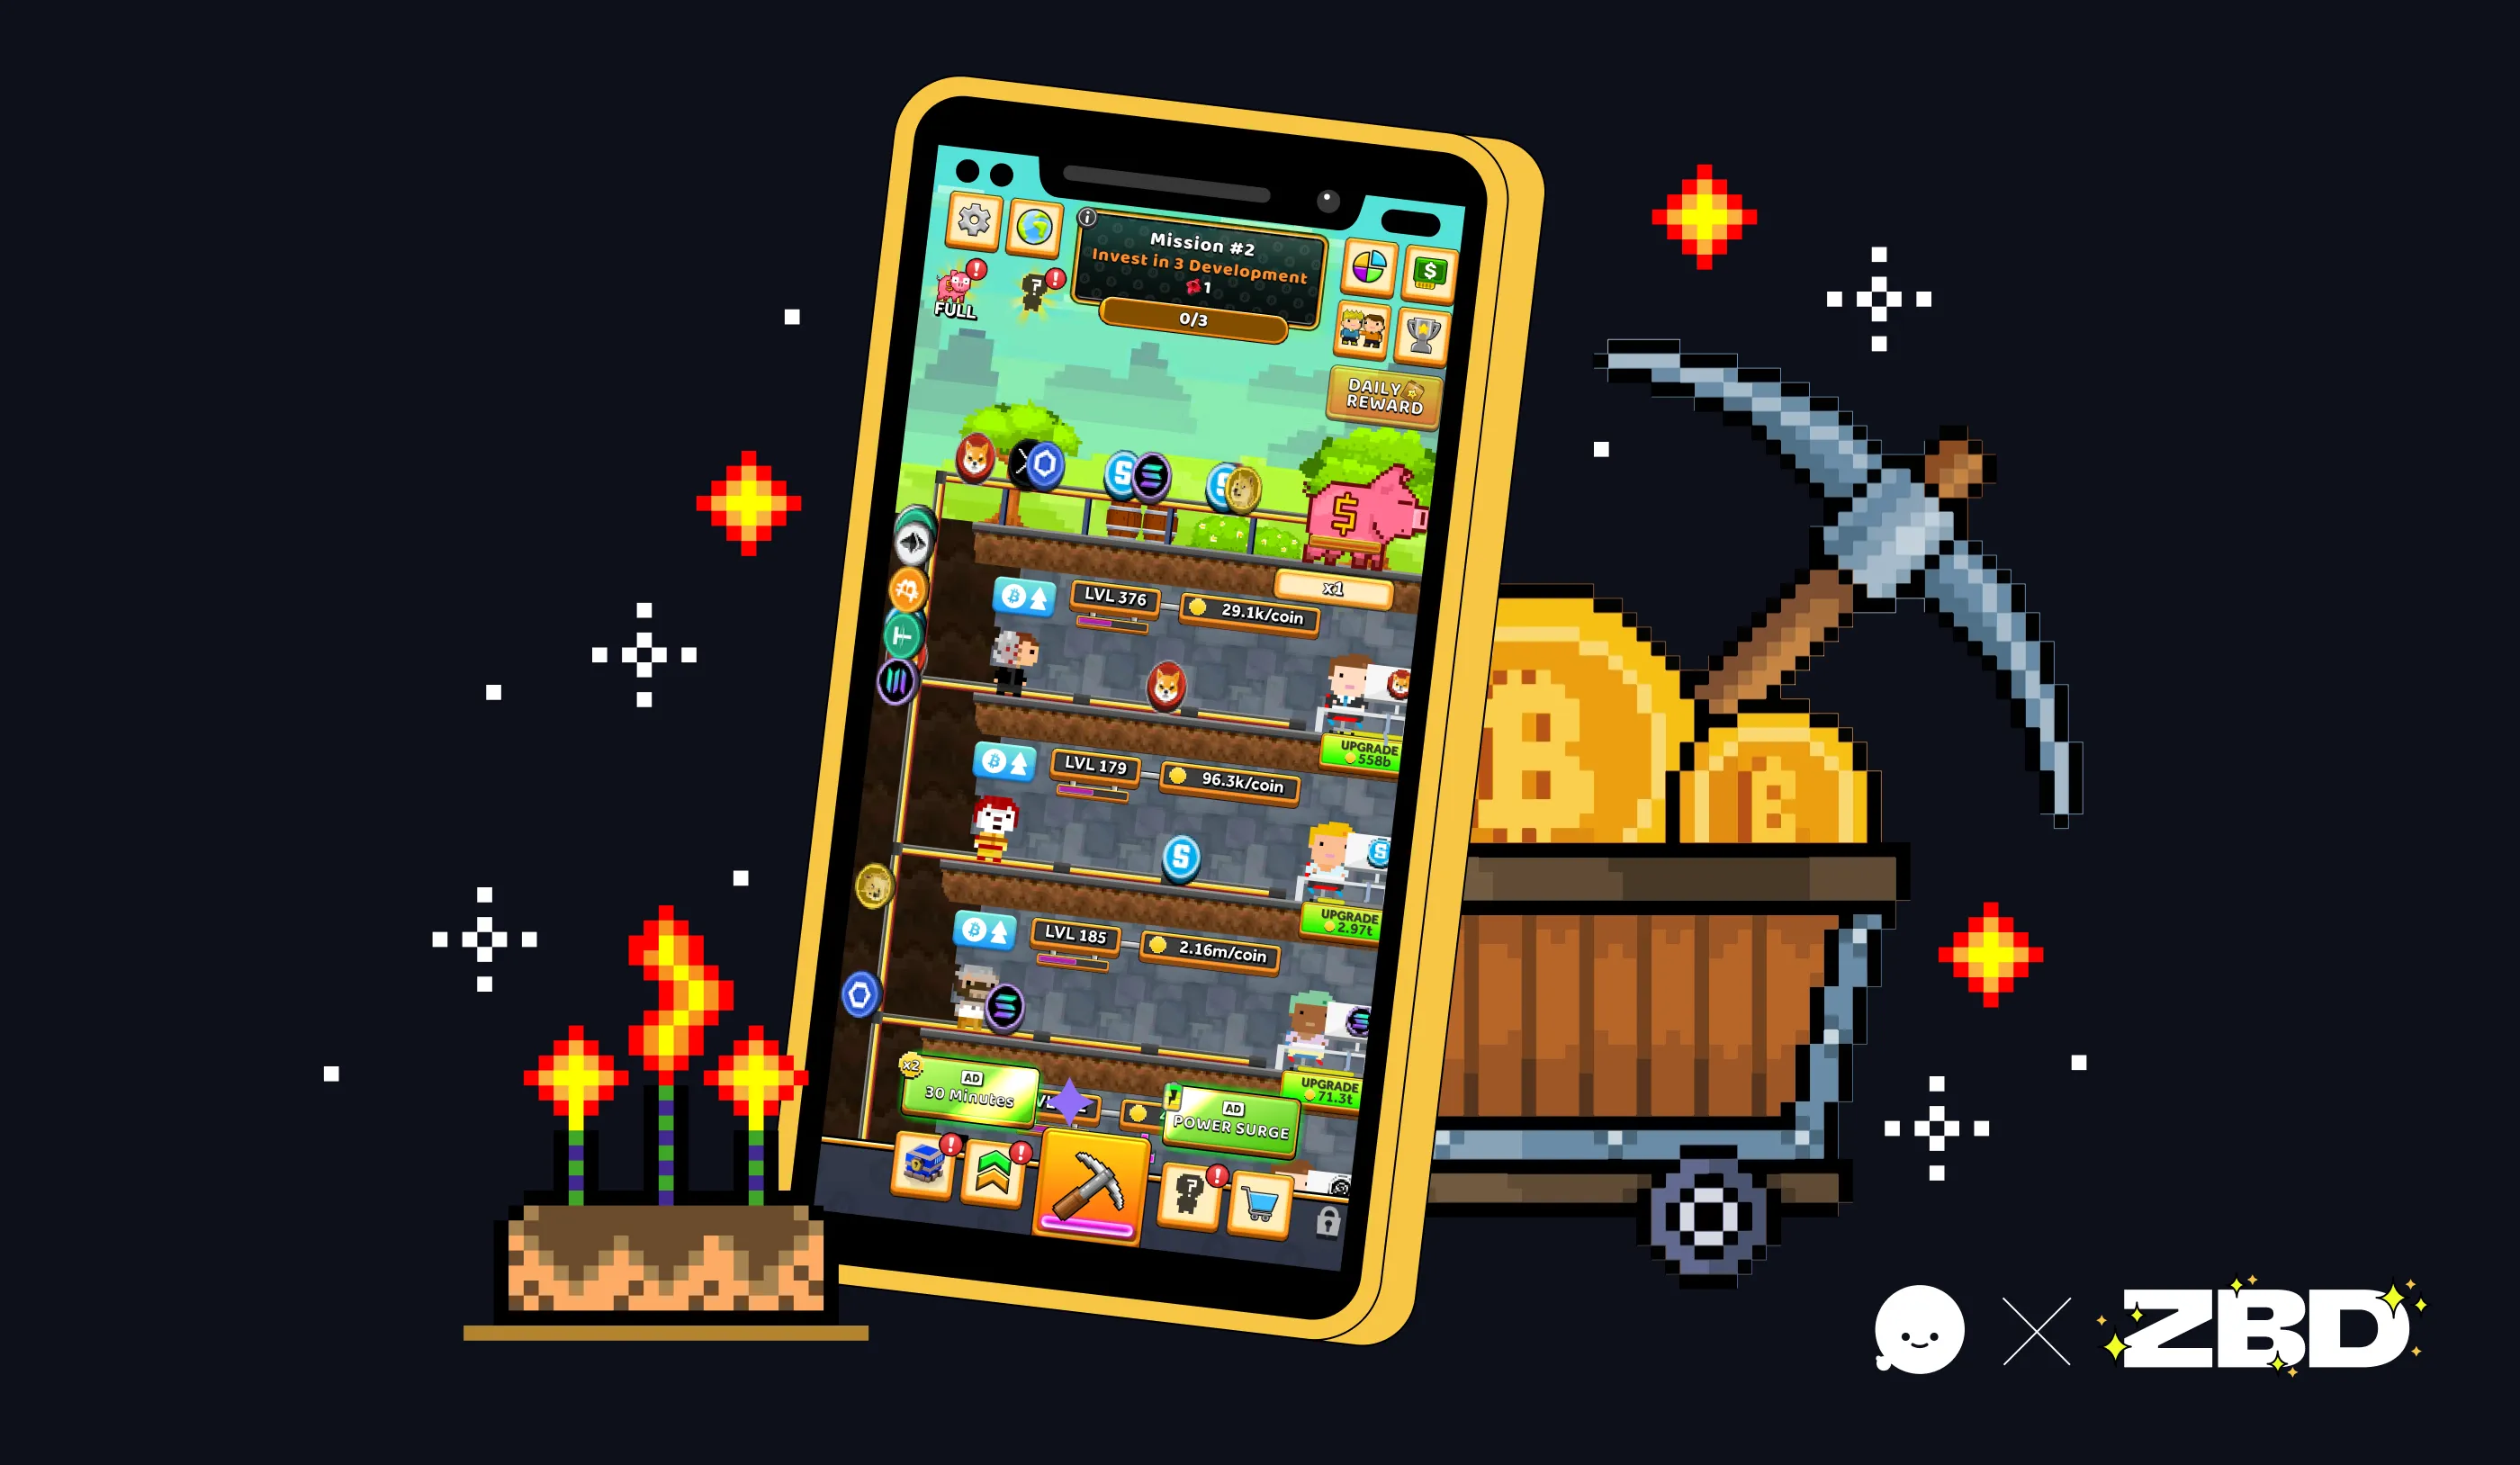 Bitcoin Miner is marking two years of BTC rewards—and over 2 million players. Image: ZBD